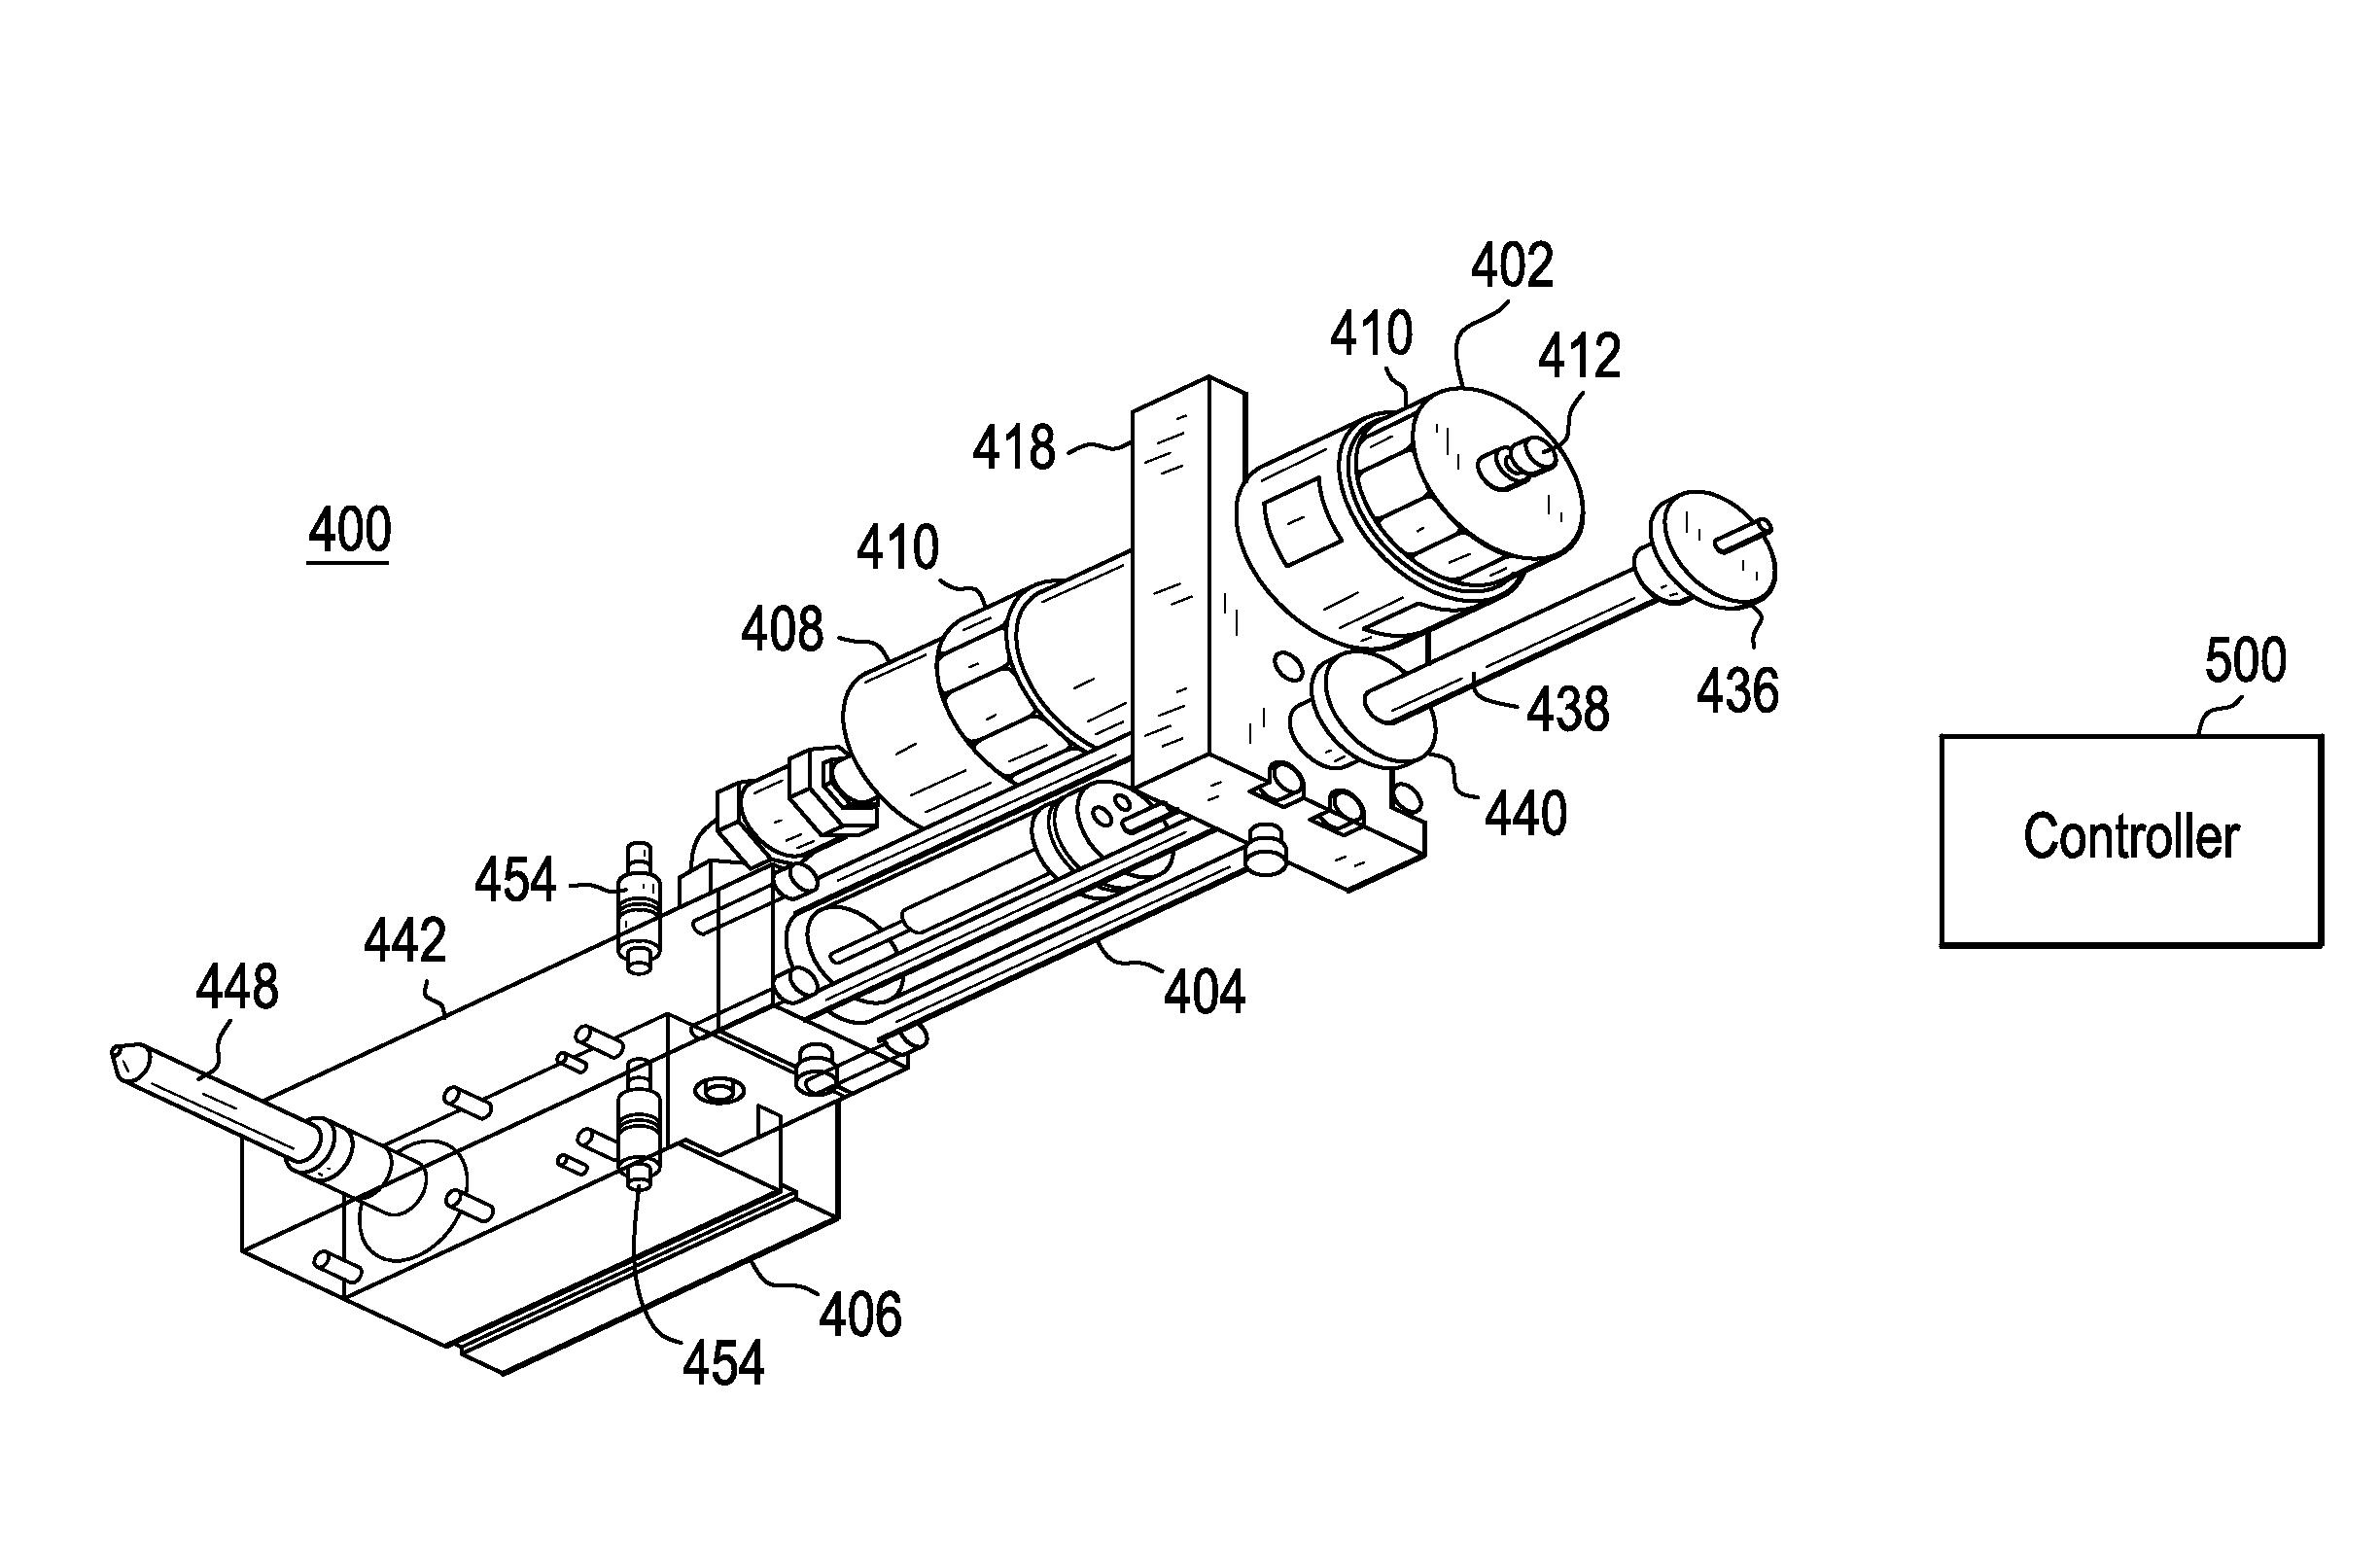 Injection molding device and method